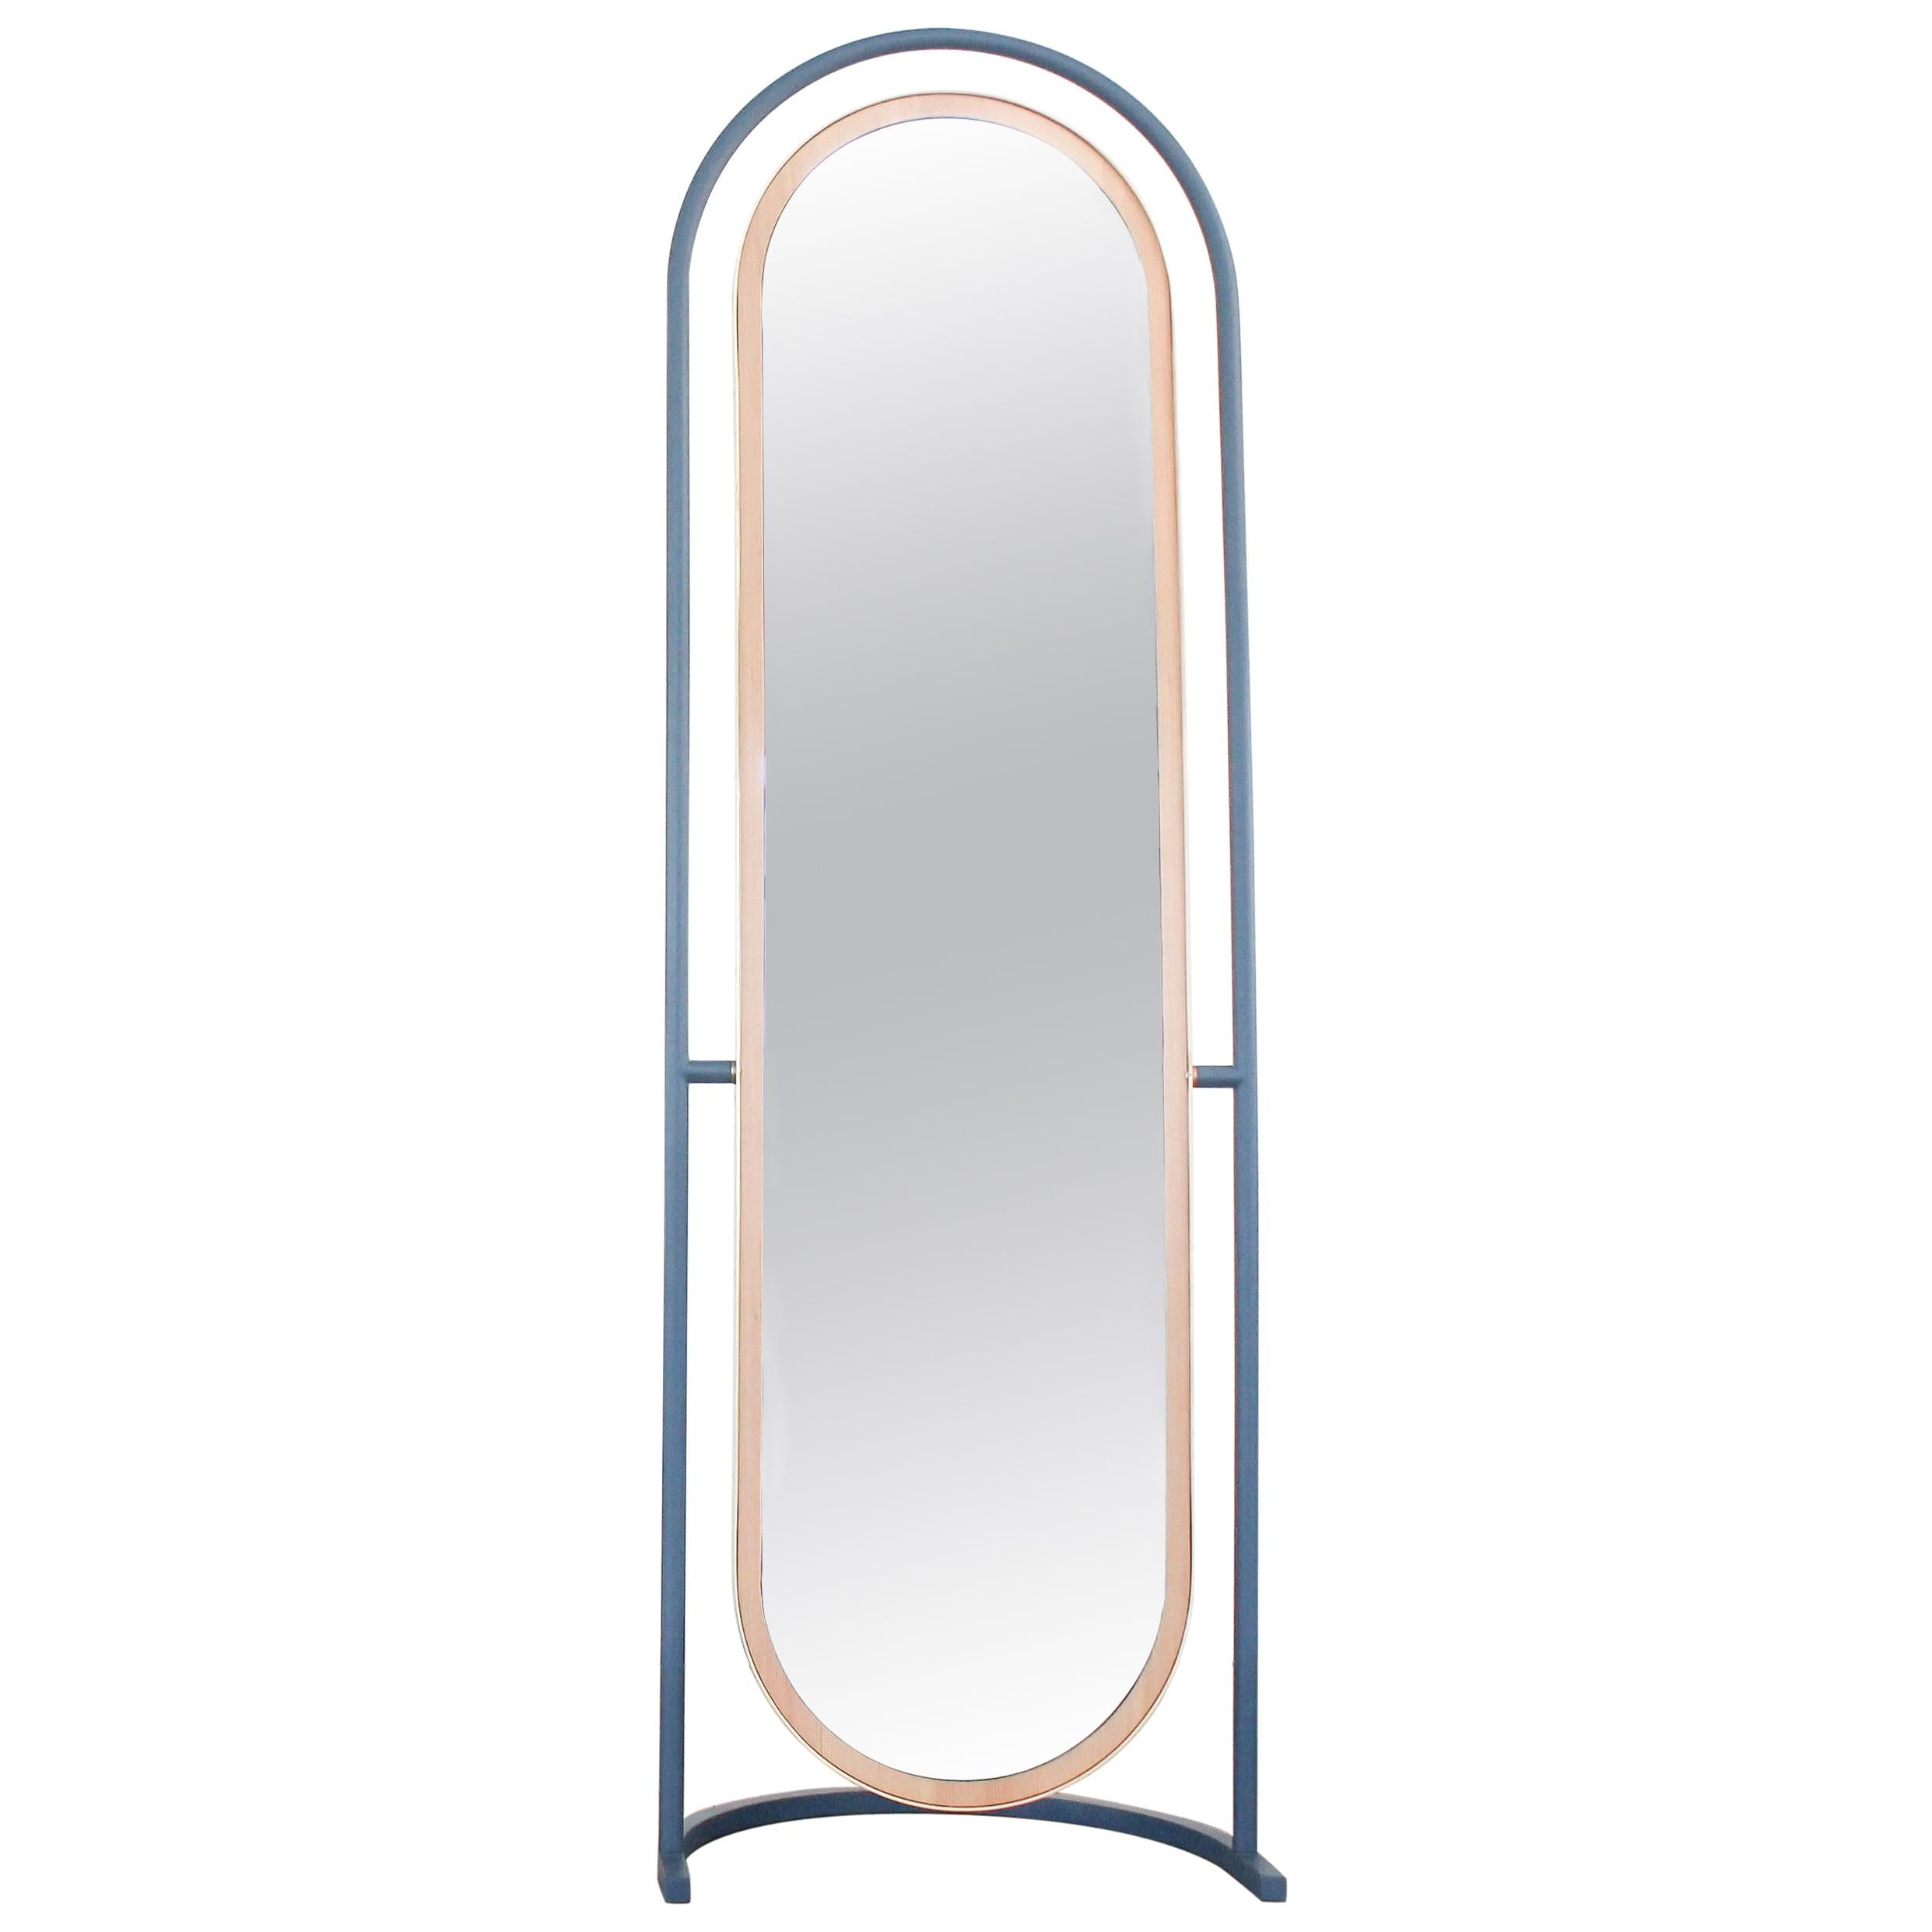 Contemporary Floor Mirror, Curved Frame Full-Length "Pill Mirror" For Sale